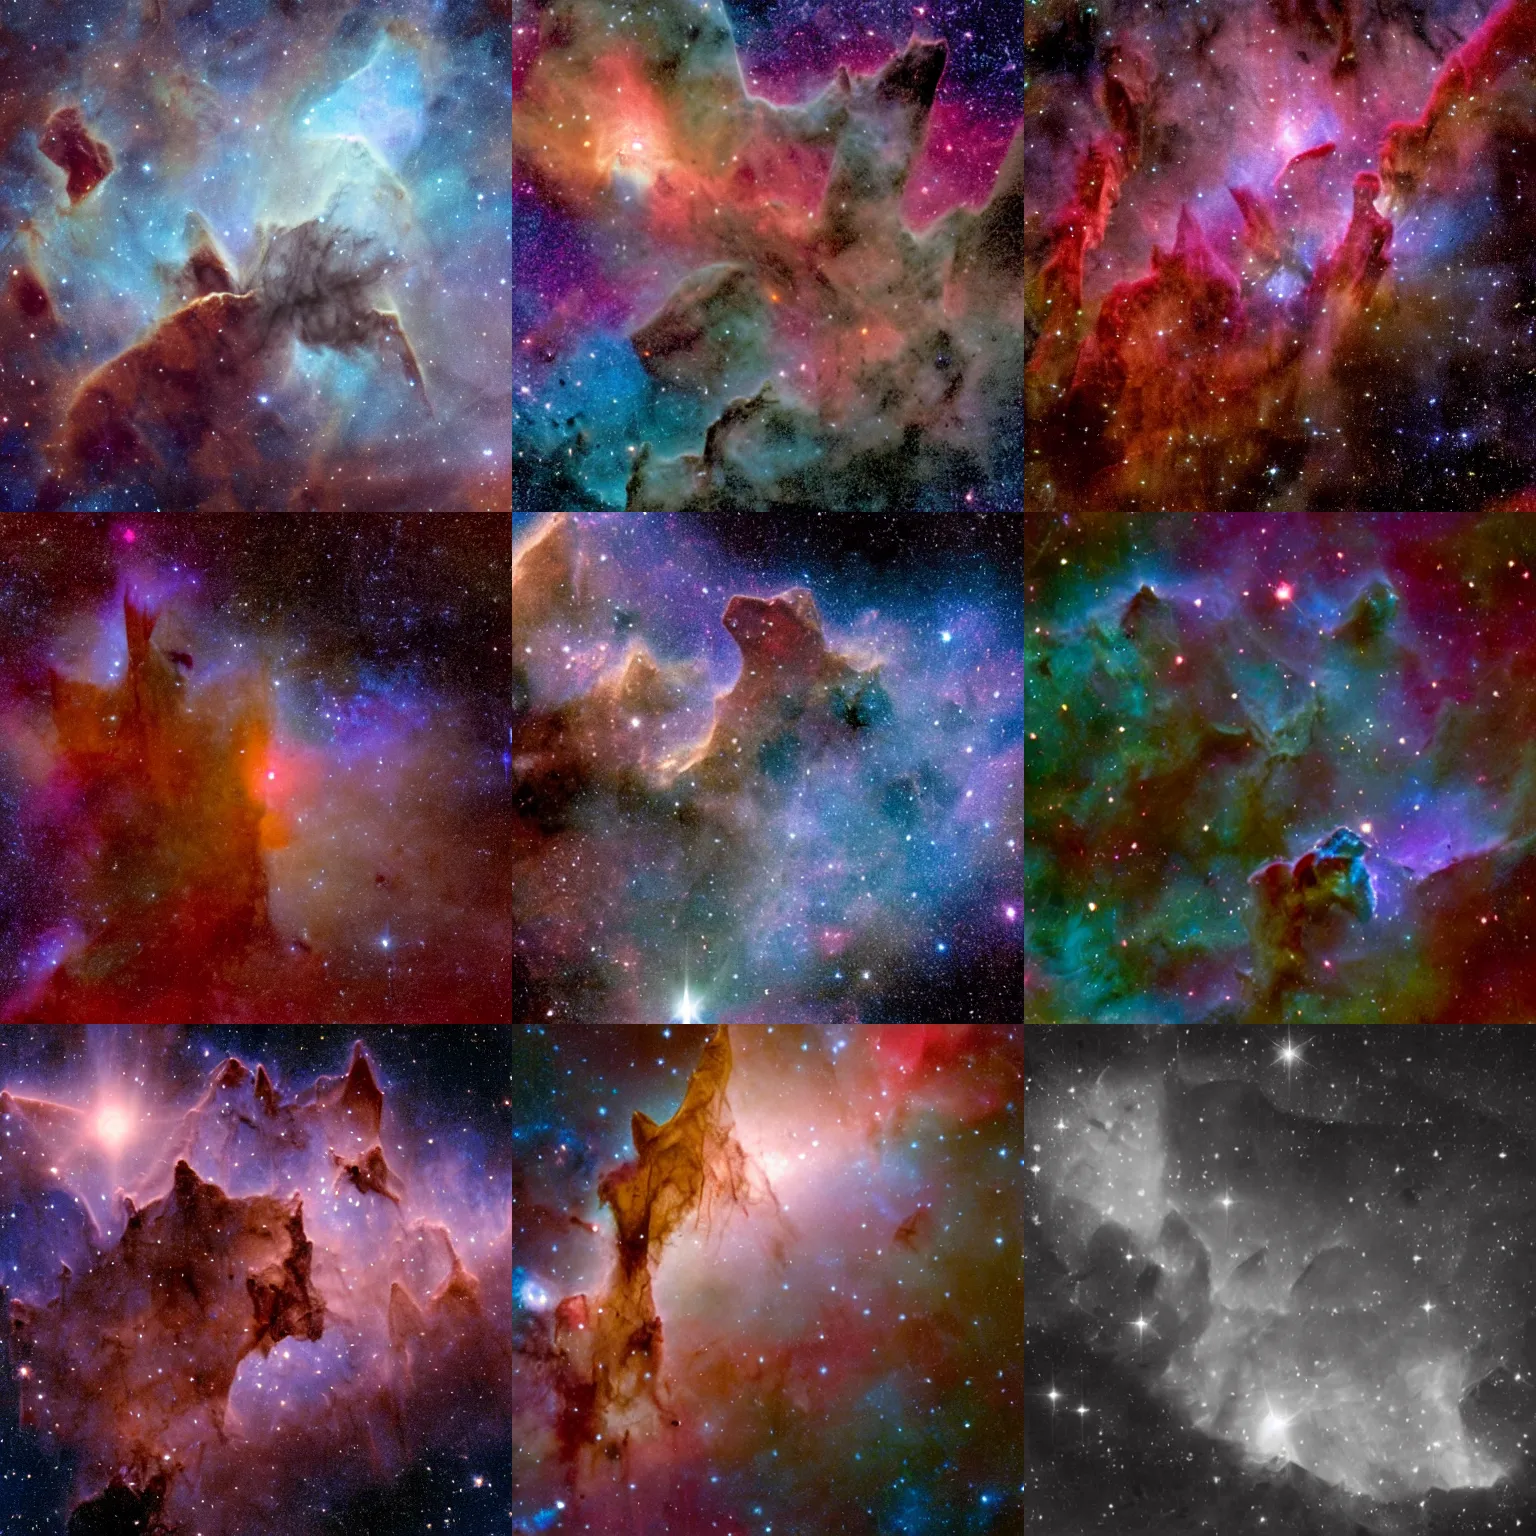 Prompt: What looks much like craggy mountains on a moonlit evening is actually the edge of a nearby, young, star-forming region NGC 3324 in the Carina Nebula. Captured in infrared light by the Near-Infrared Camera (NIRCam) on NASA’s James Webb Space Telescope, this image reveals previously obscured areas of star birth.